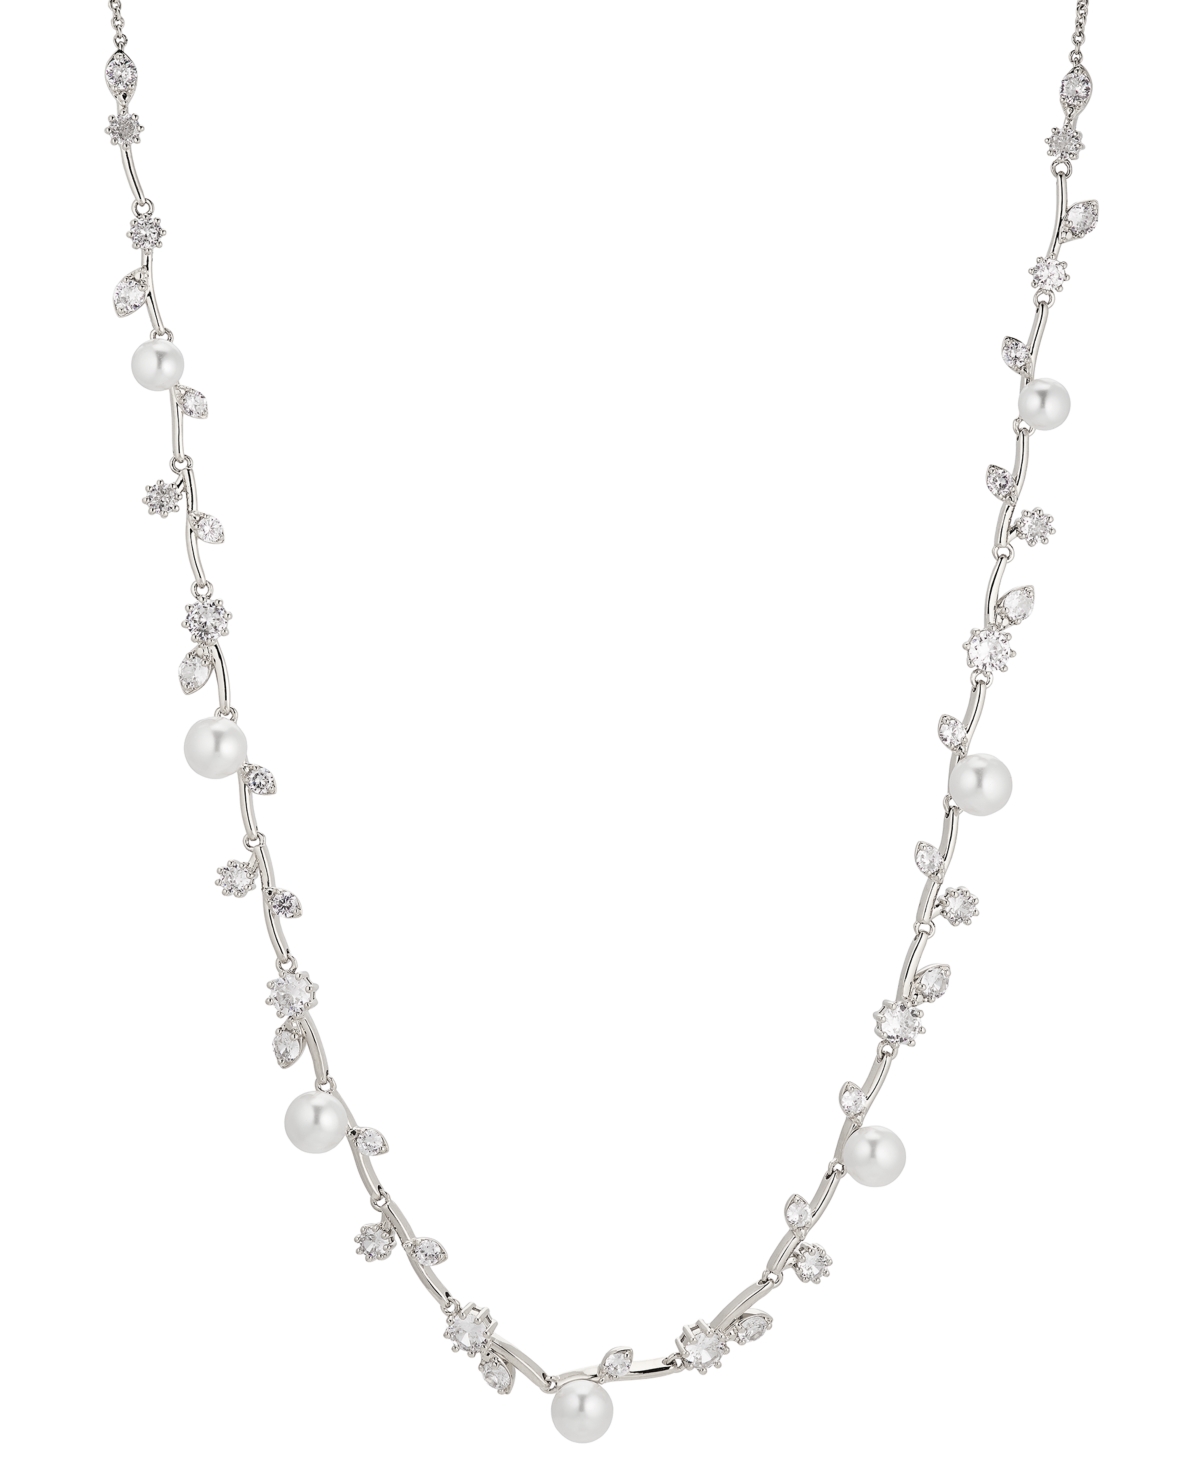 Rhodium-Plated Cubic Zirconia & Imitation Pearl Vine 18" Adjustable Statement Necklace, Created for Macy's - Rhodium